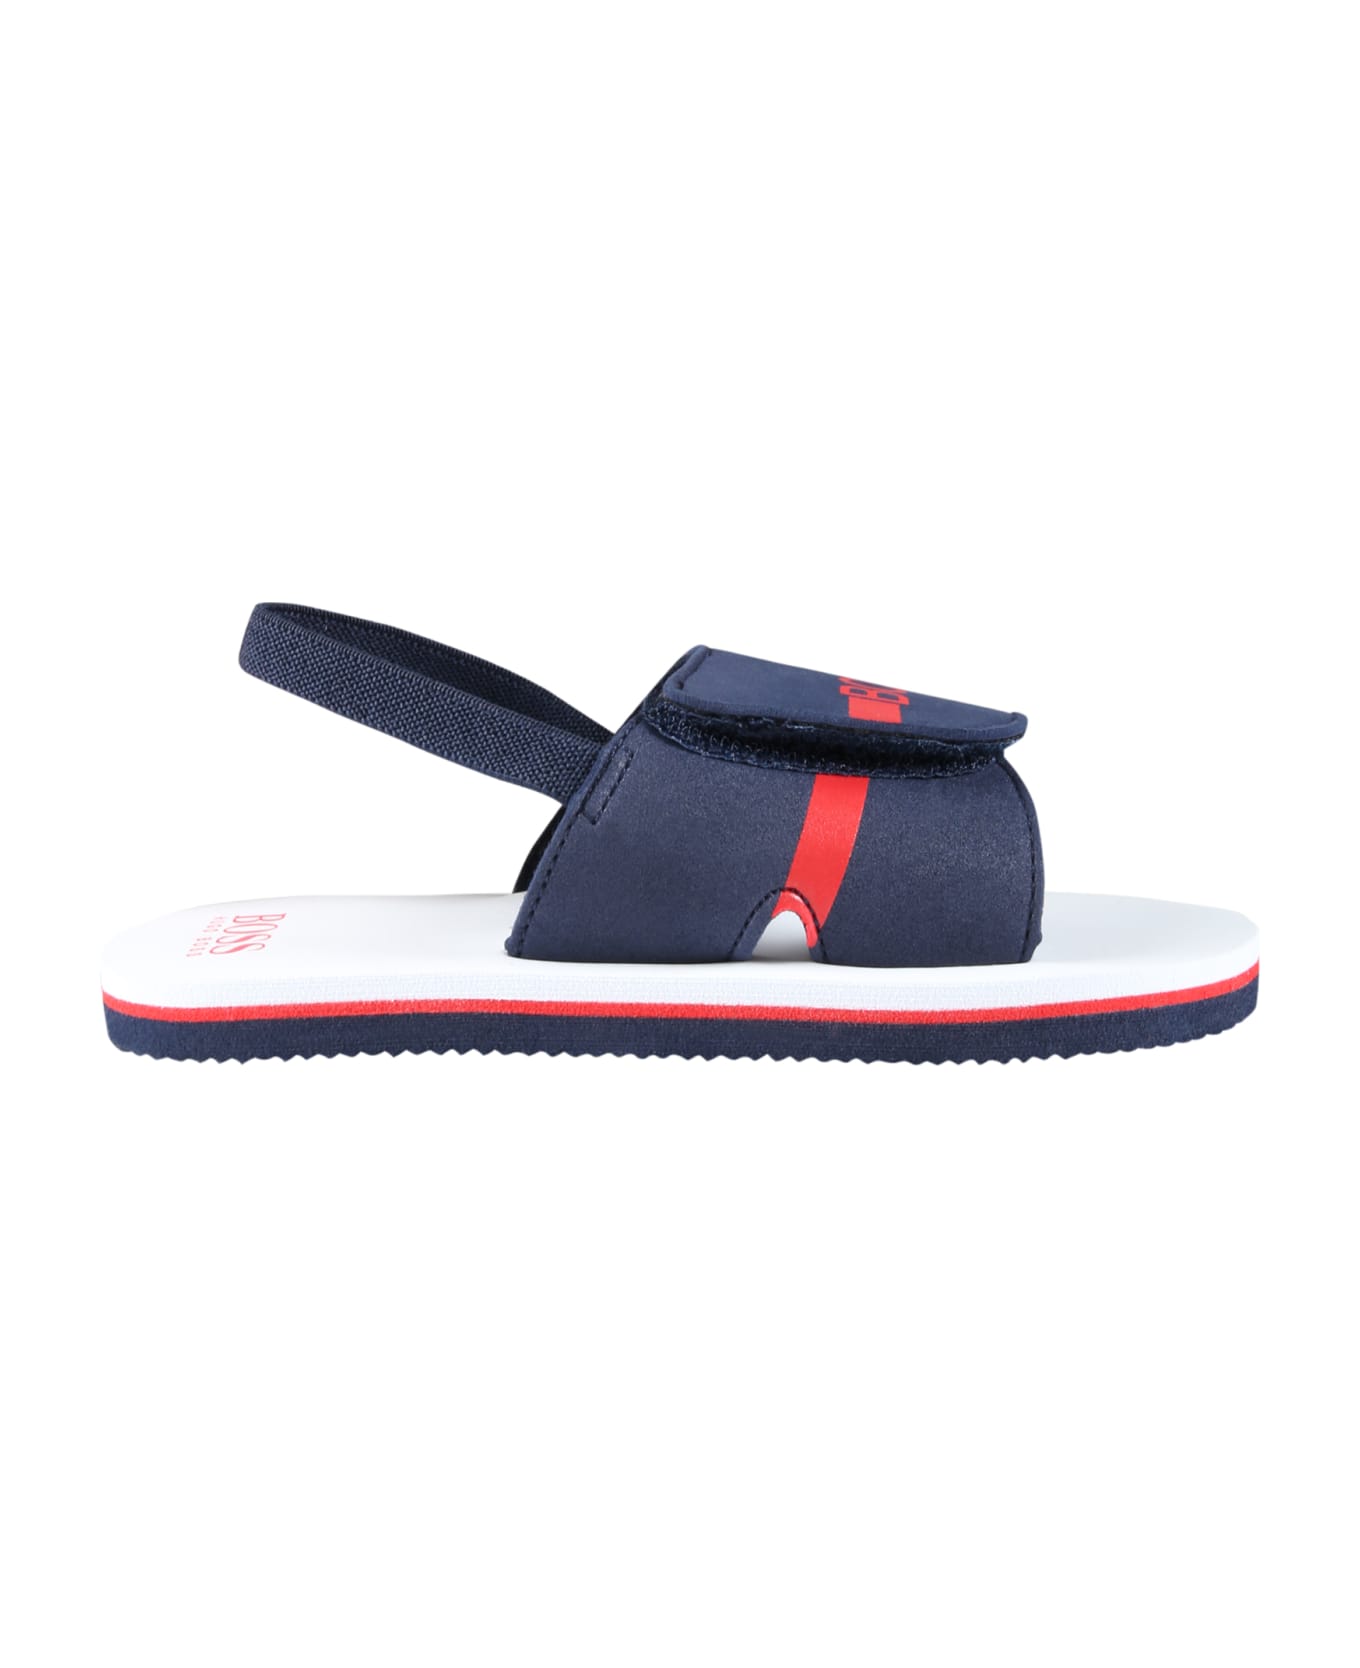 Hugo Boss Blue Sandals For Boy With Red Logo - Blue シューズ